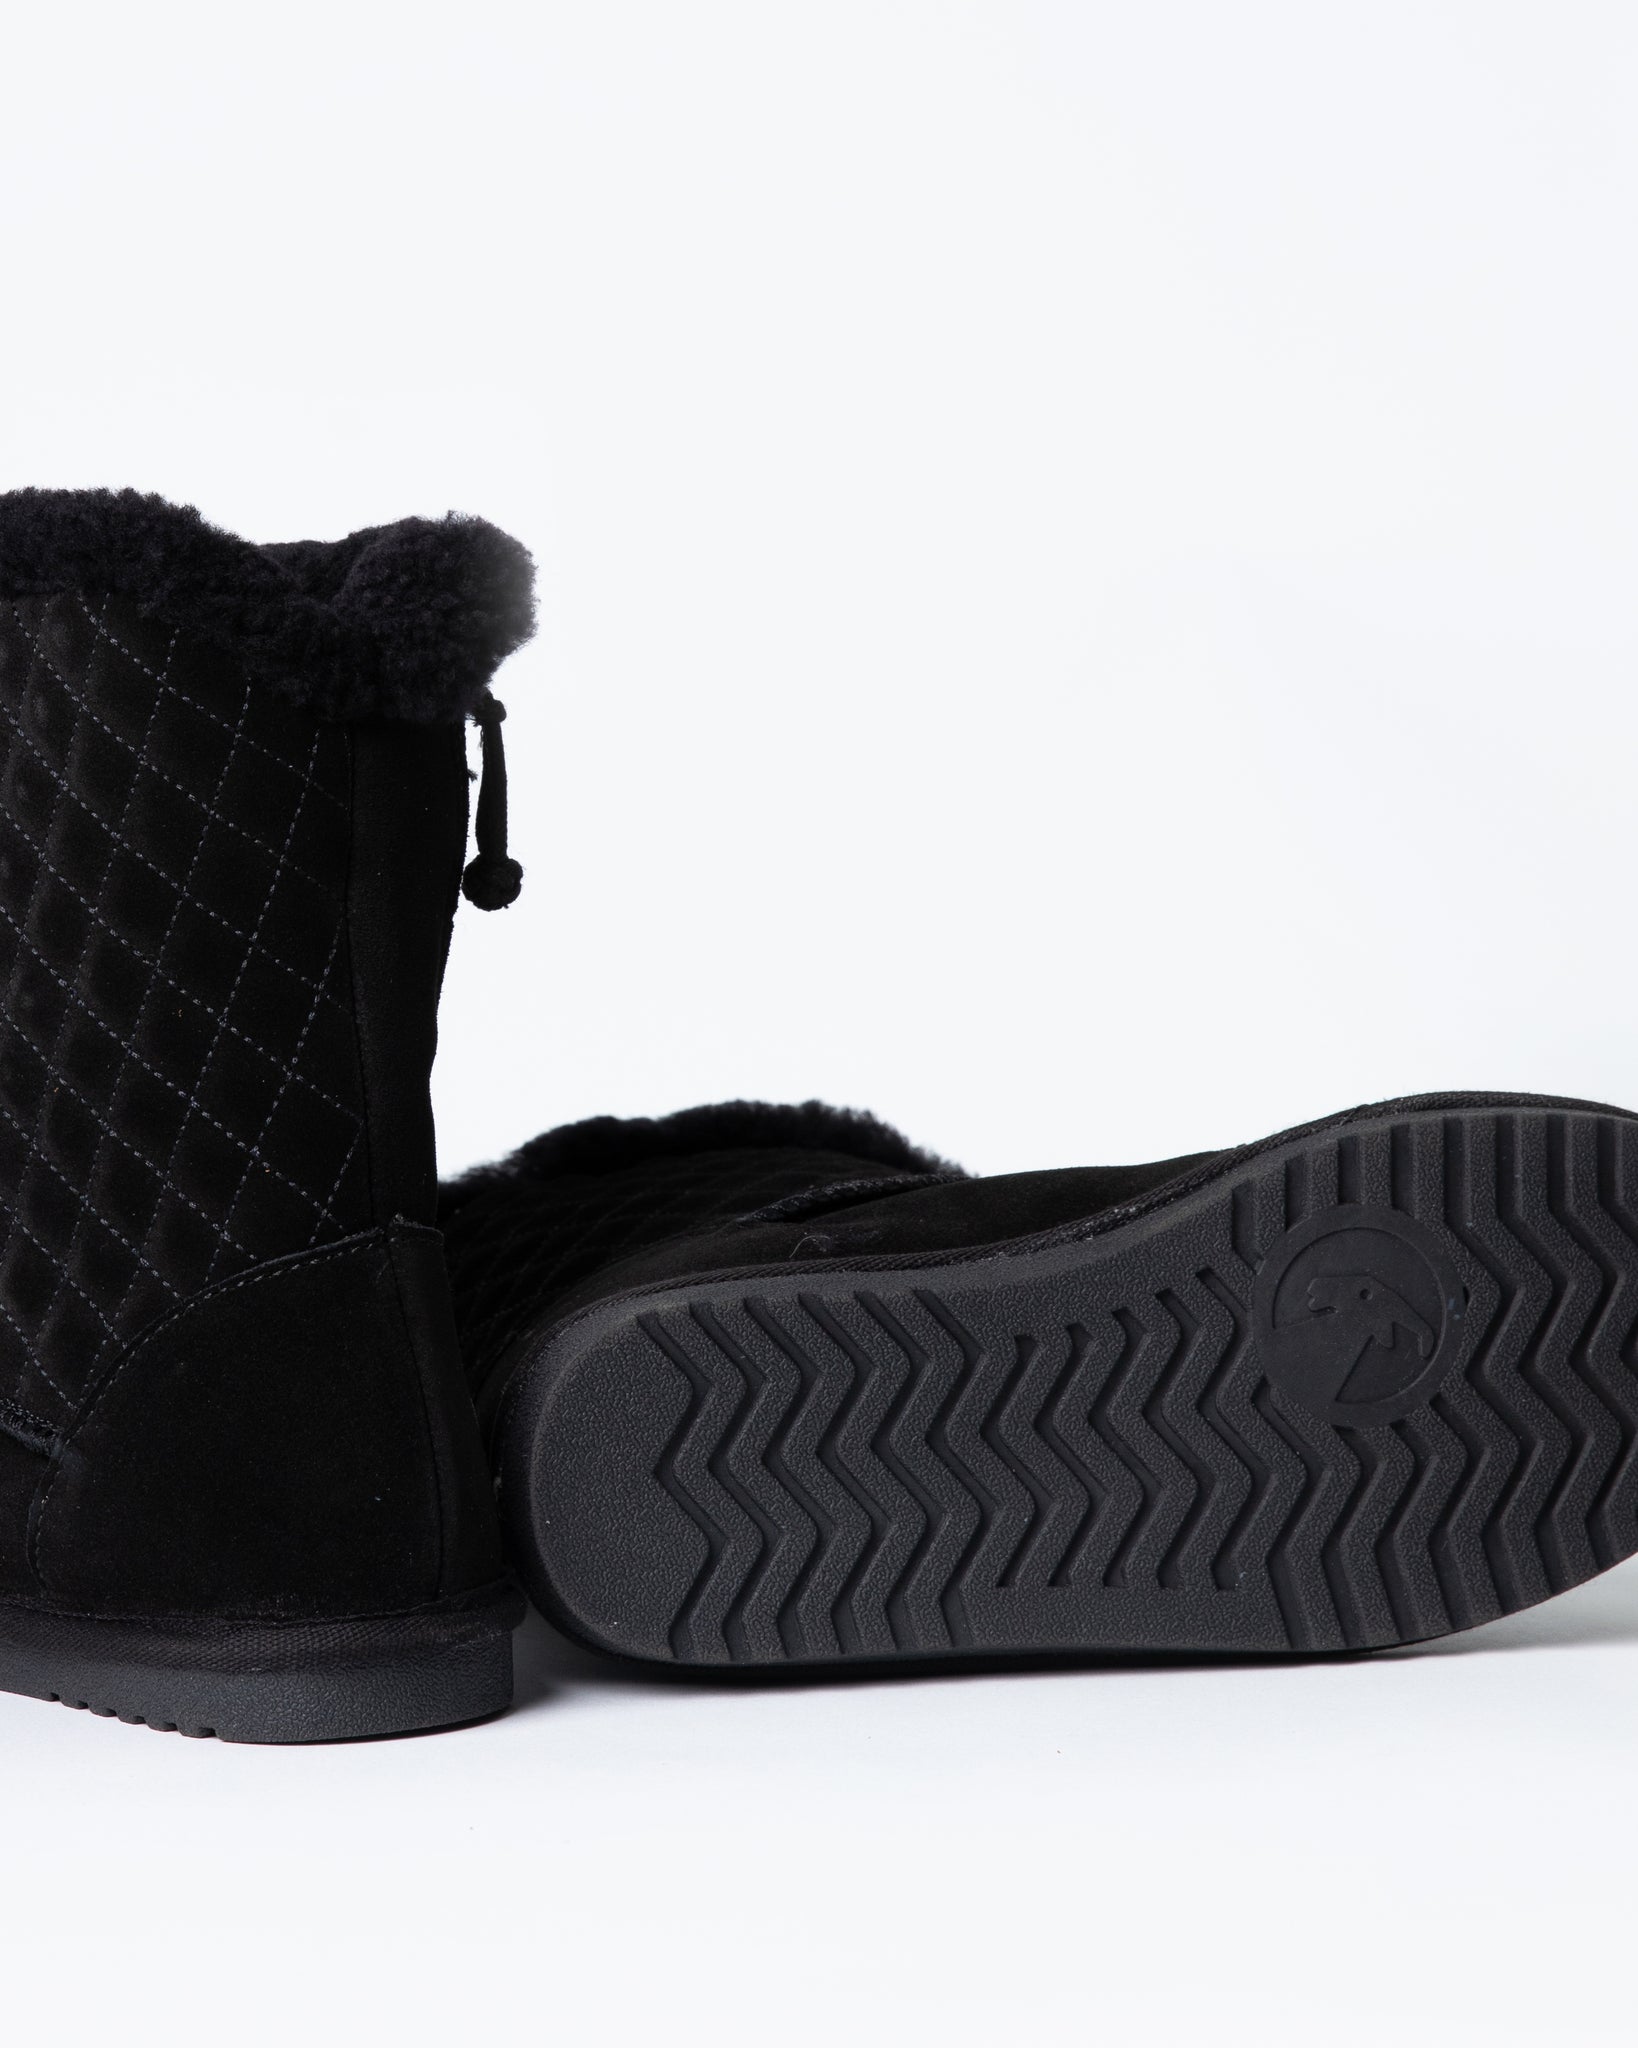 Cozy Boot Lux (Toddler) - Black Quilt